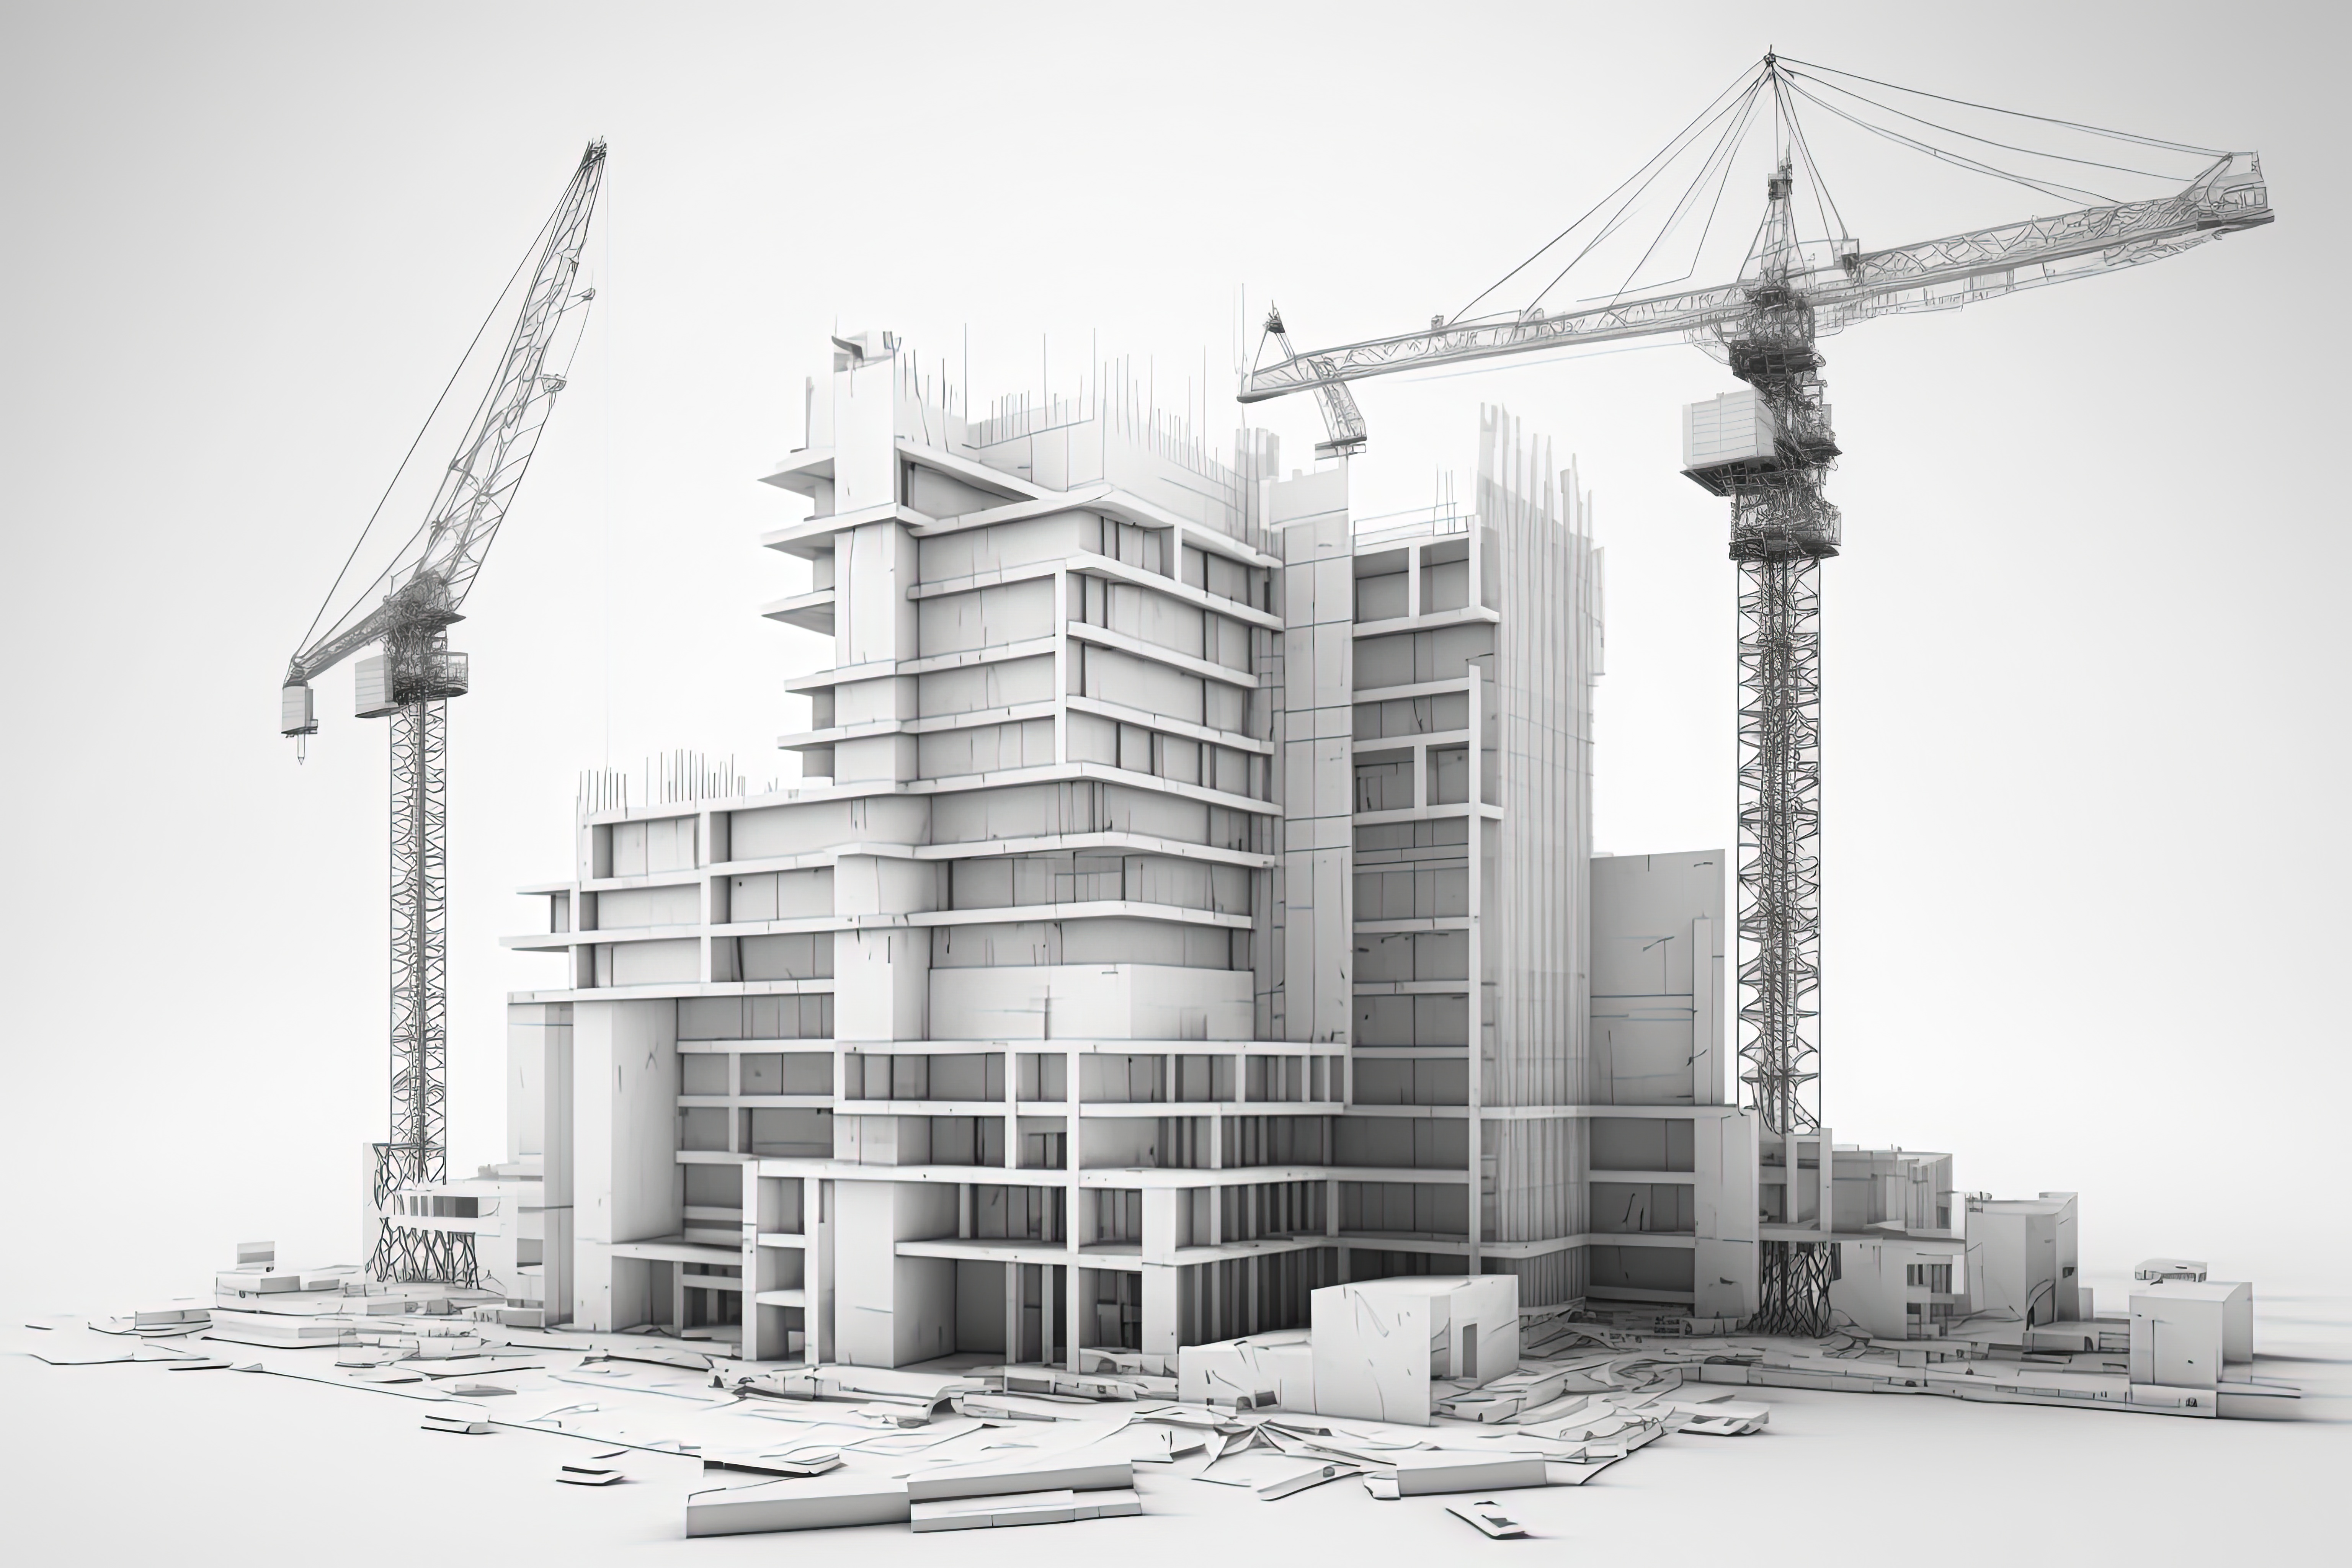 3d-building-drawings-tower-cranes-building-construction-environmentai-technology-generated-imag.jpg